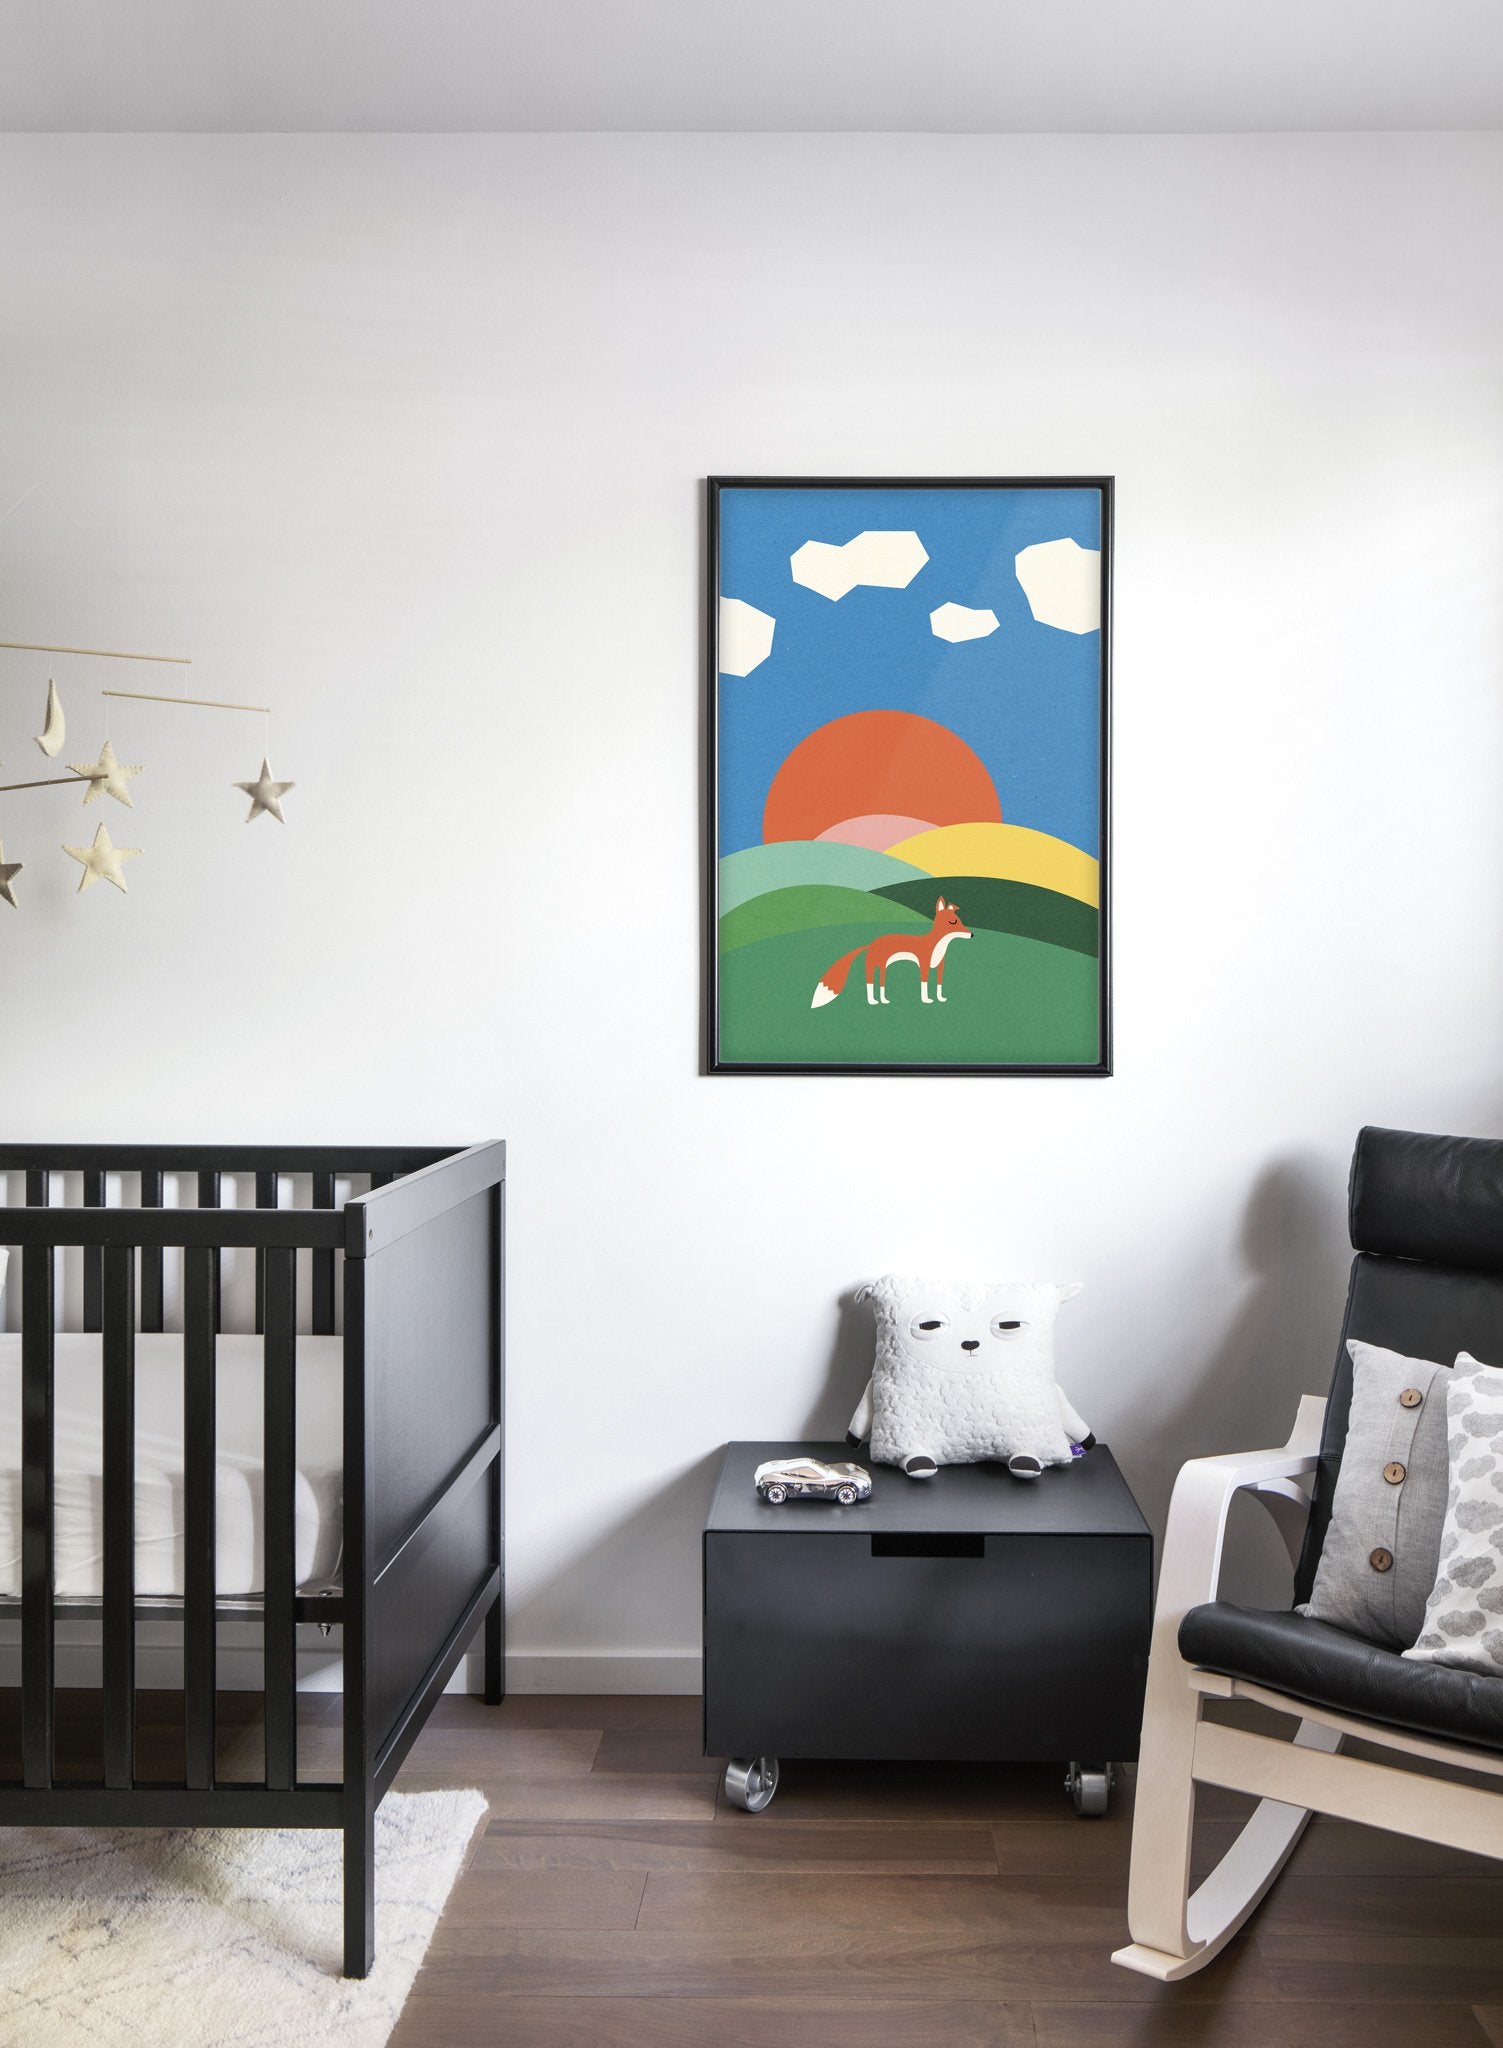 Modern minimalist poster by Opposite Wall with abstract collage illustration of fox in hills - Nursery